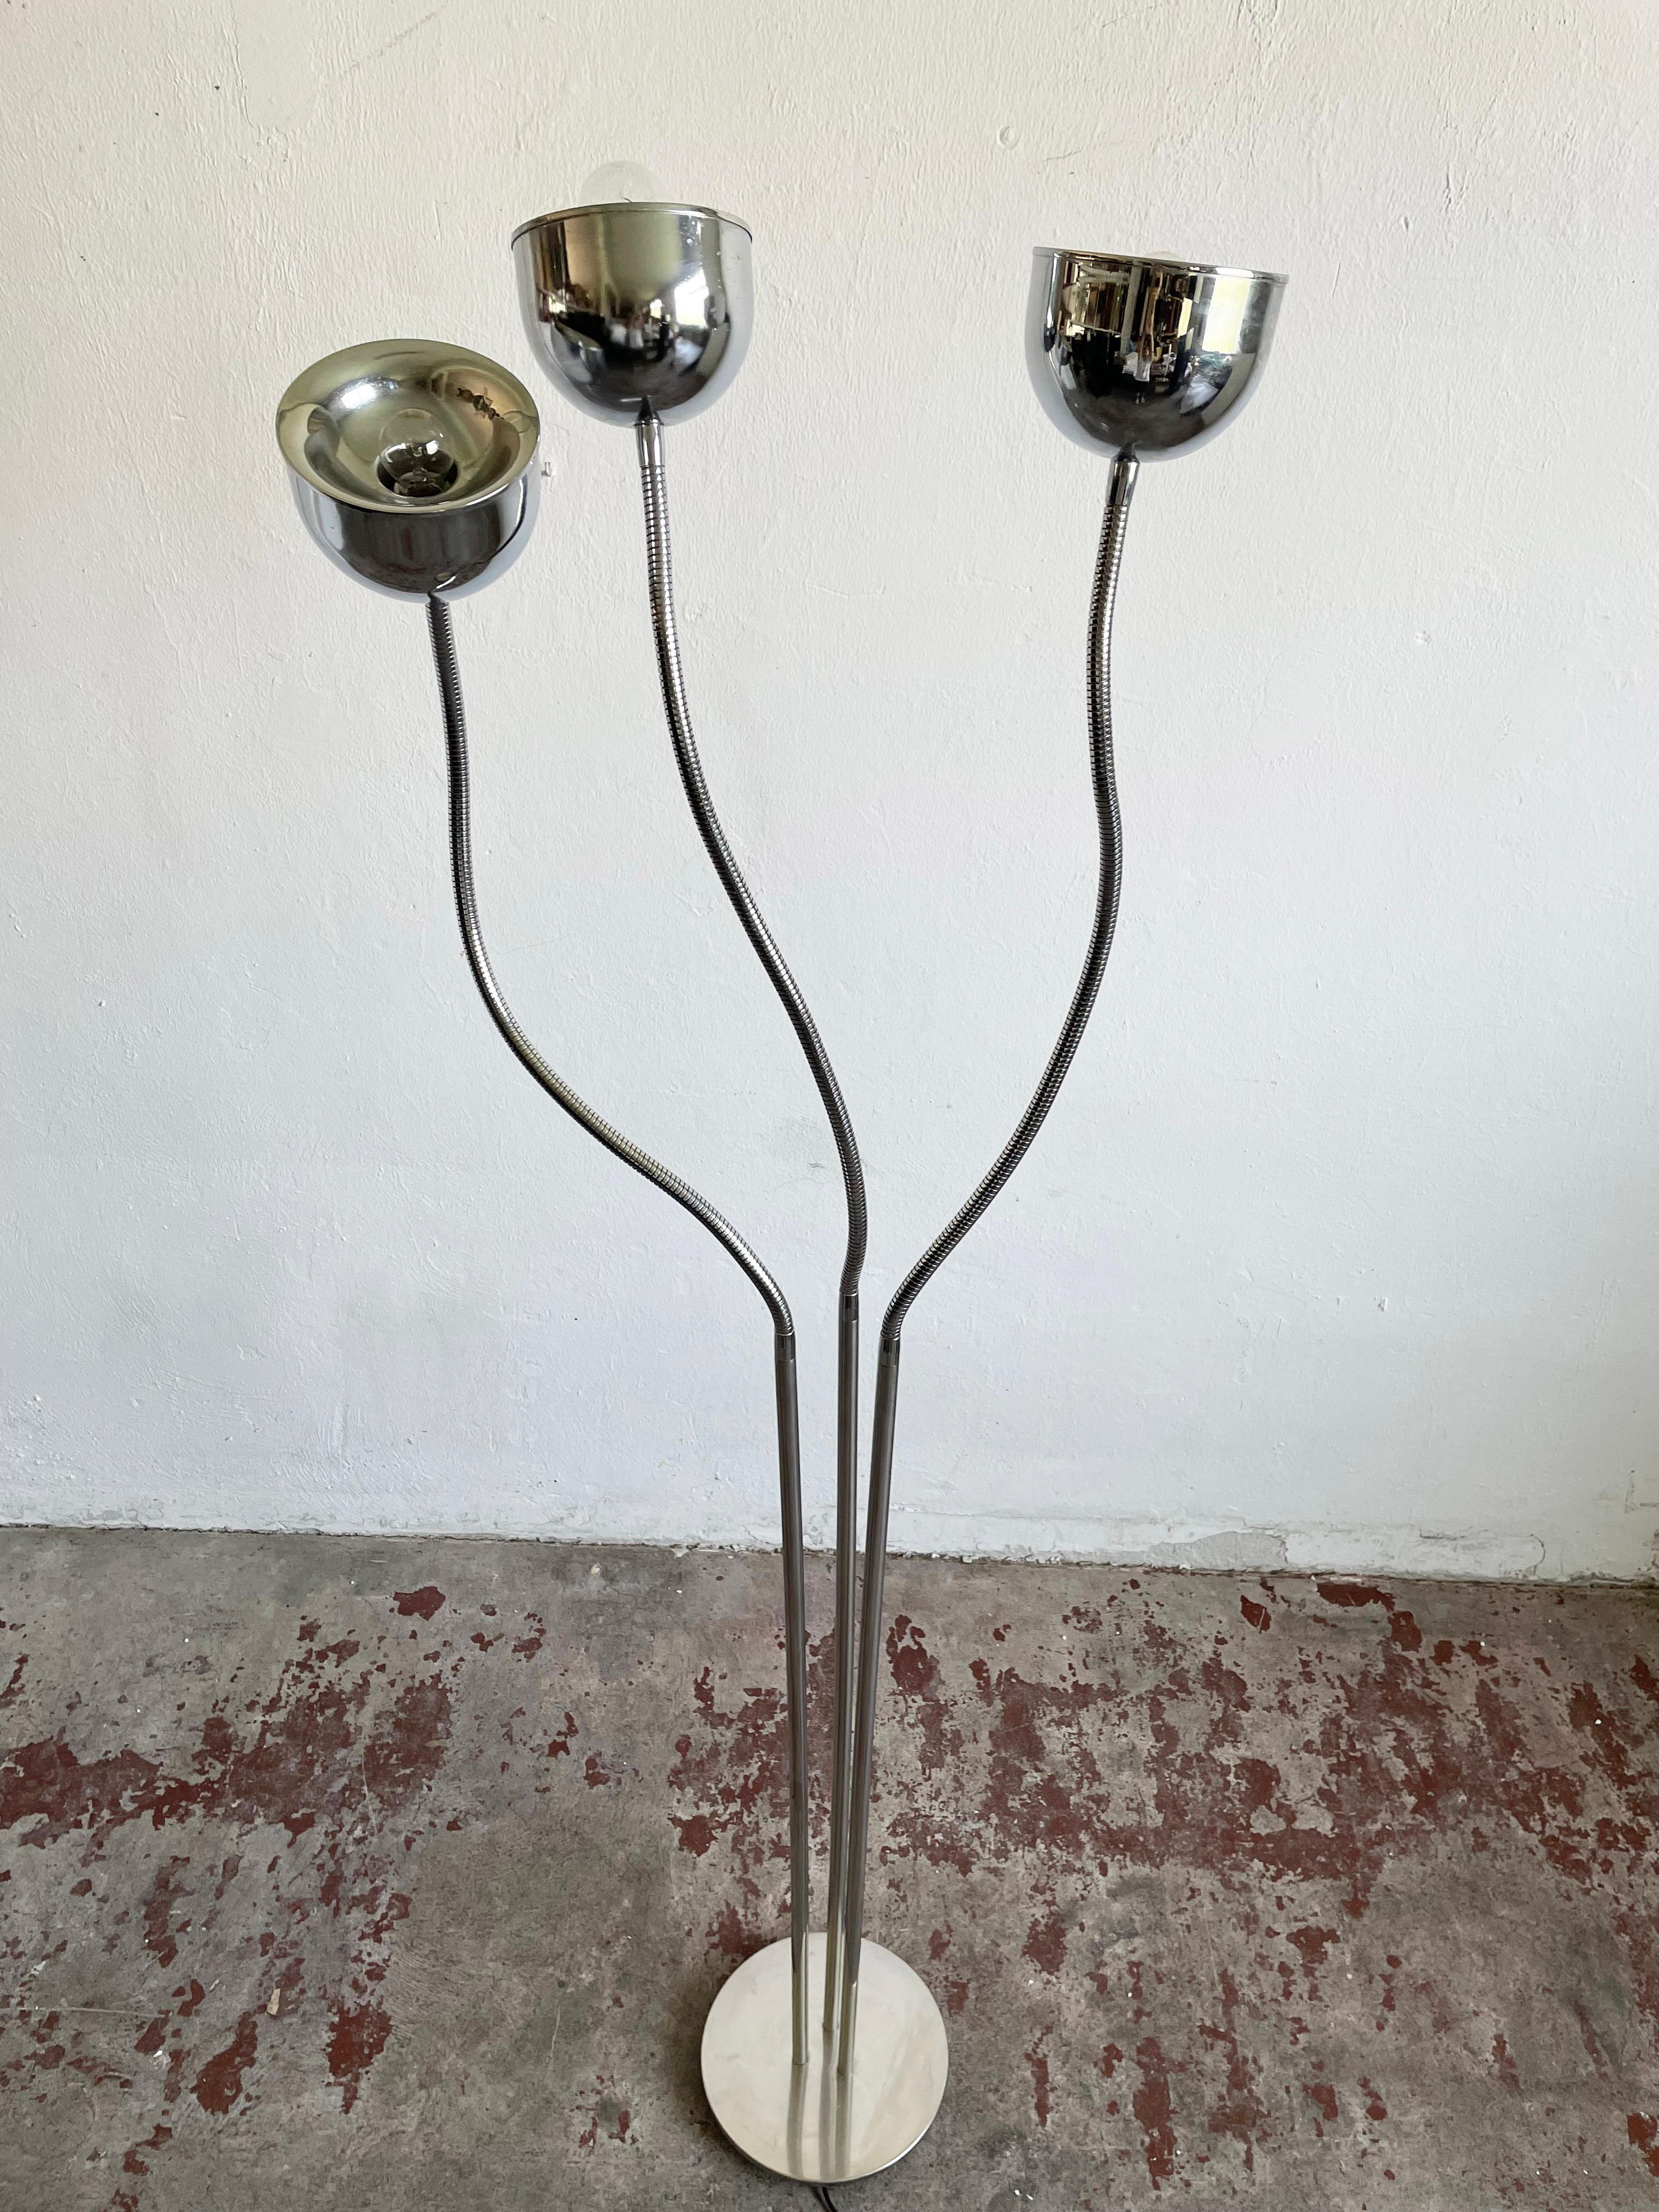 Vintage Italian Chrome Floor Lamp in style of Reggiani, Space Age Lamp, 1970s For Sale 1